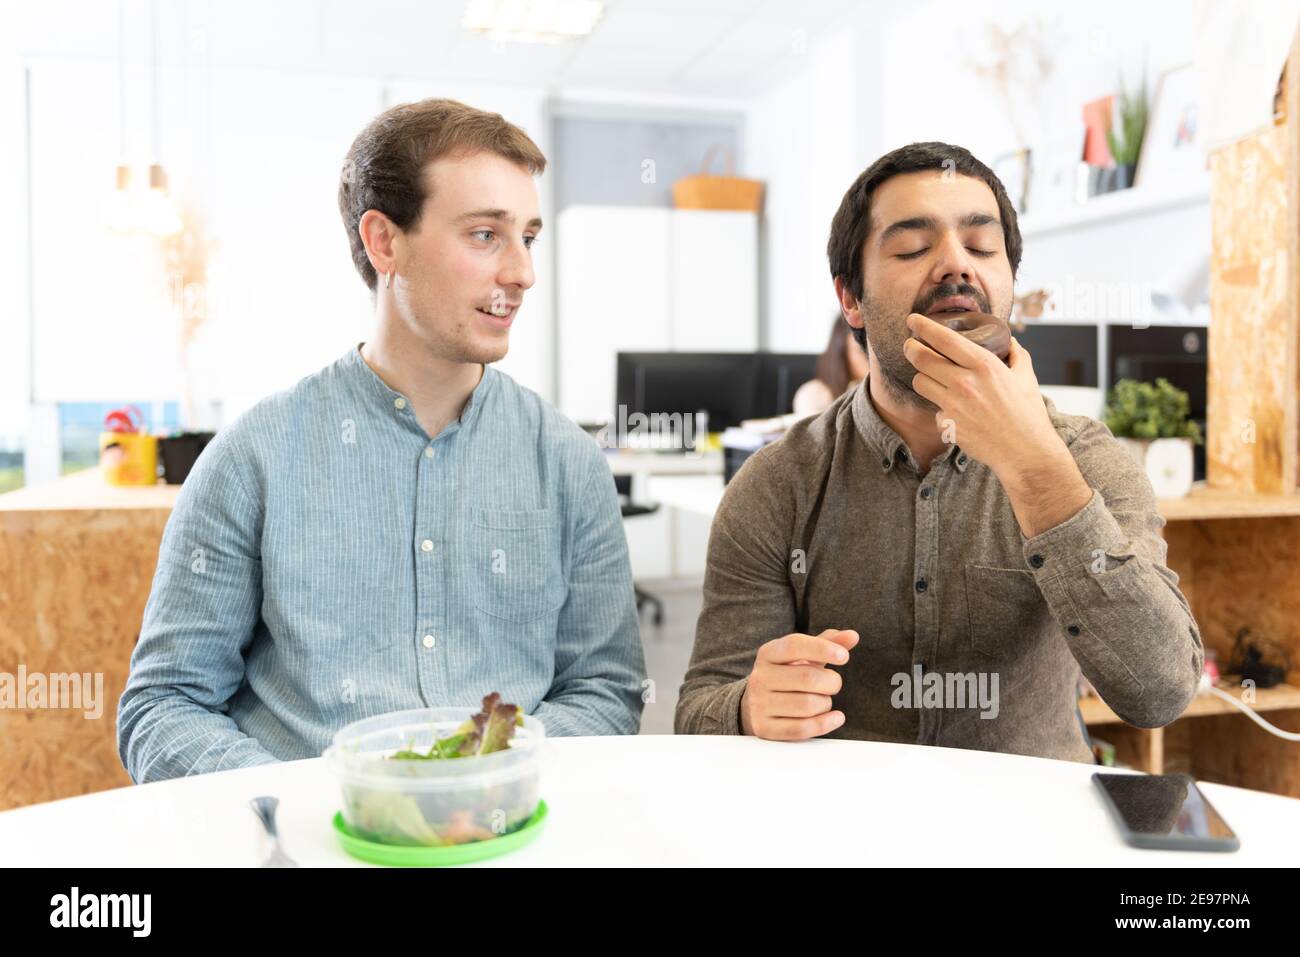 A man with a salad looking with envy to his coworker eating a sweet food in the office. Stock Photo